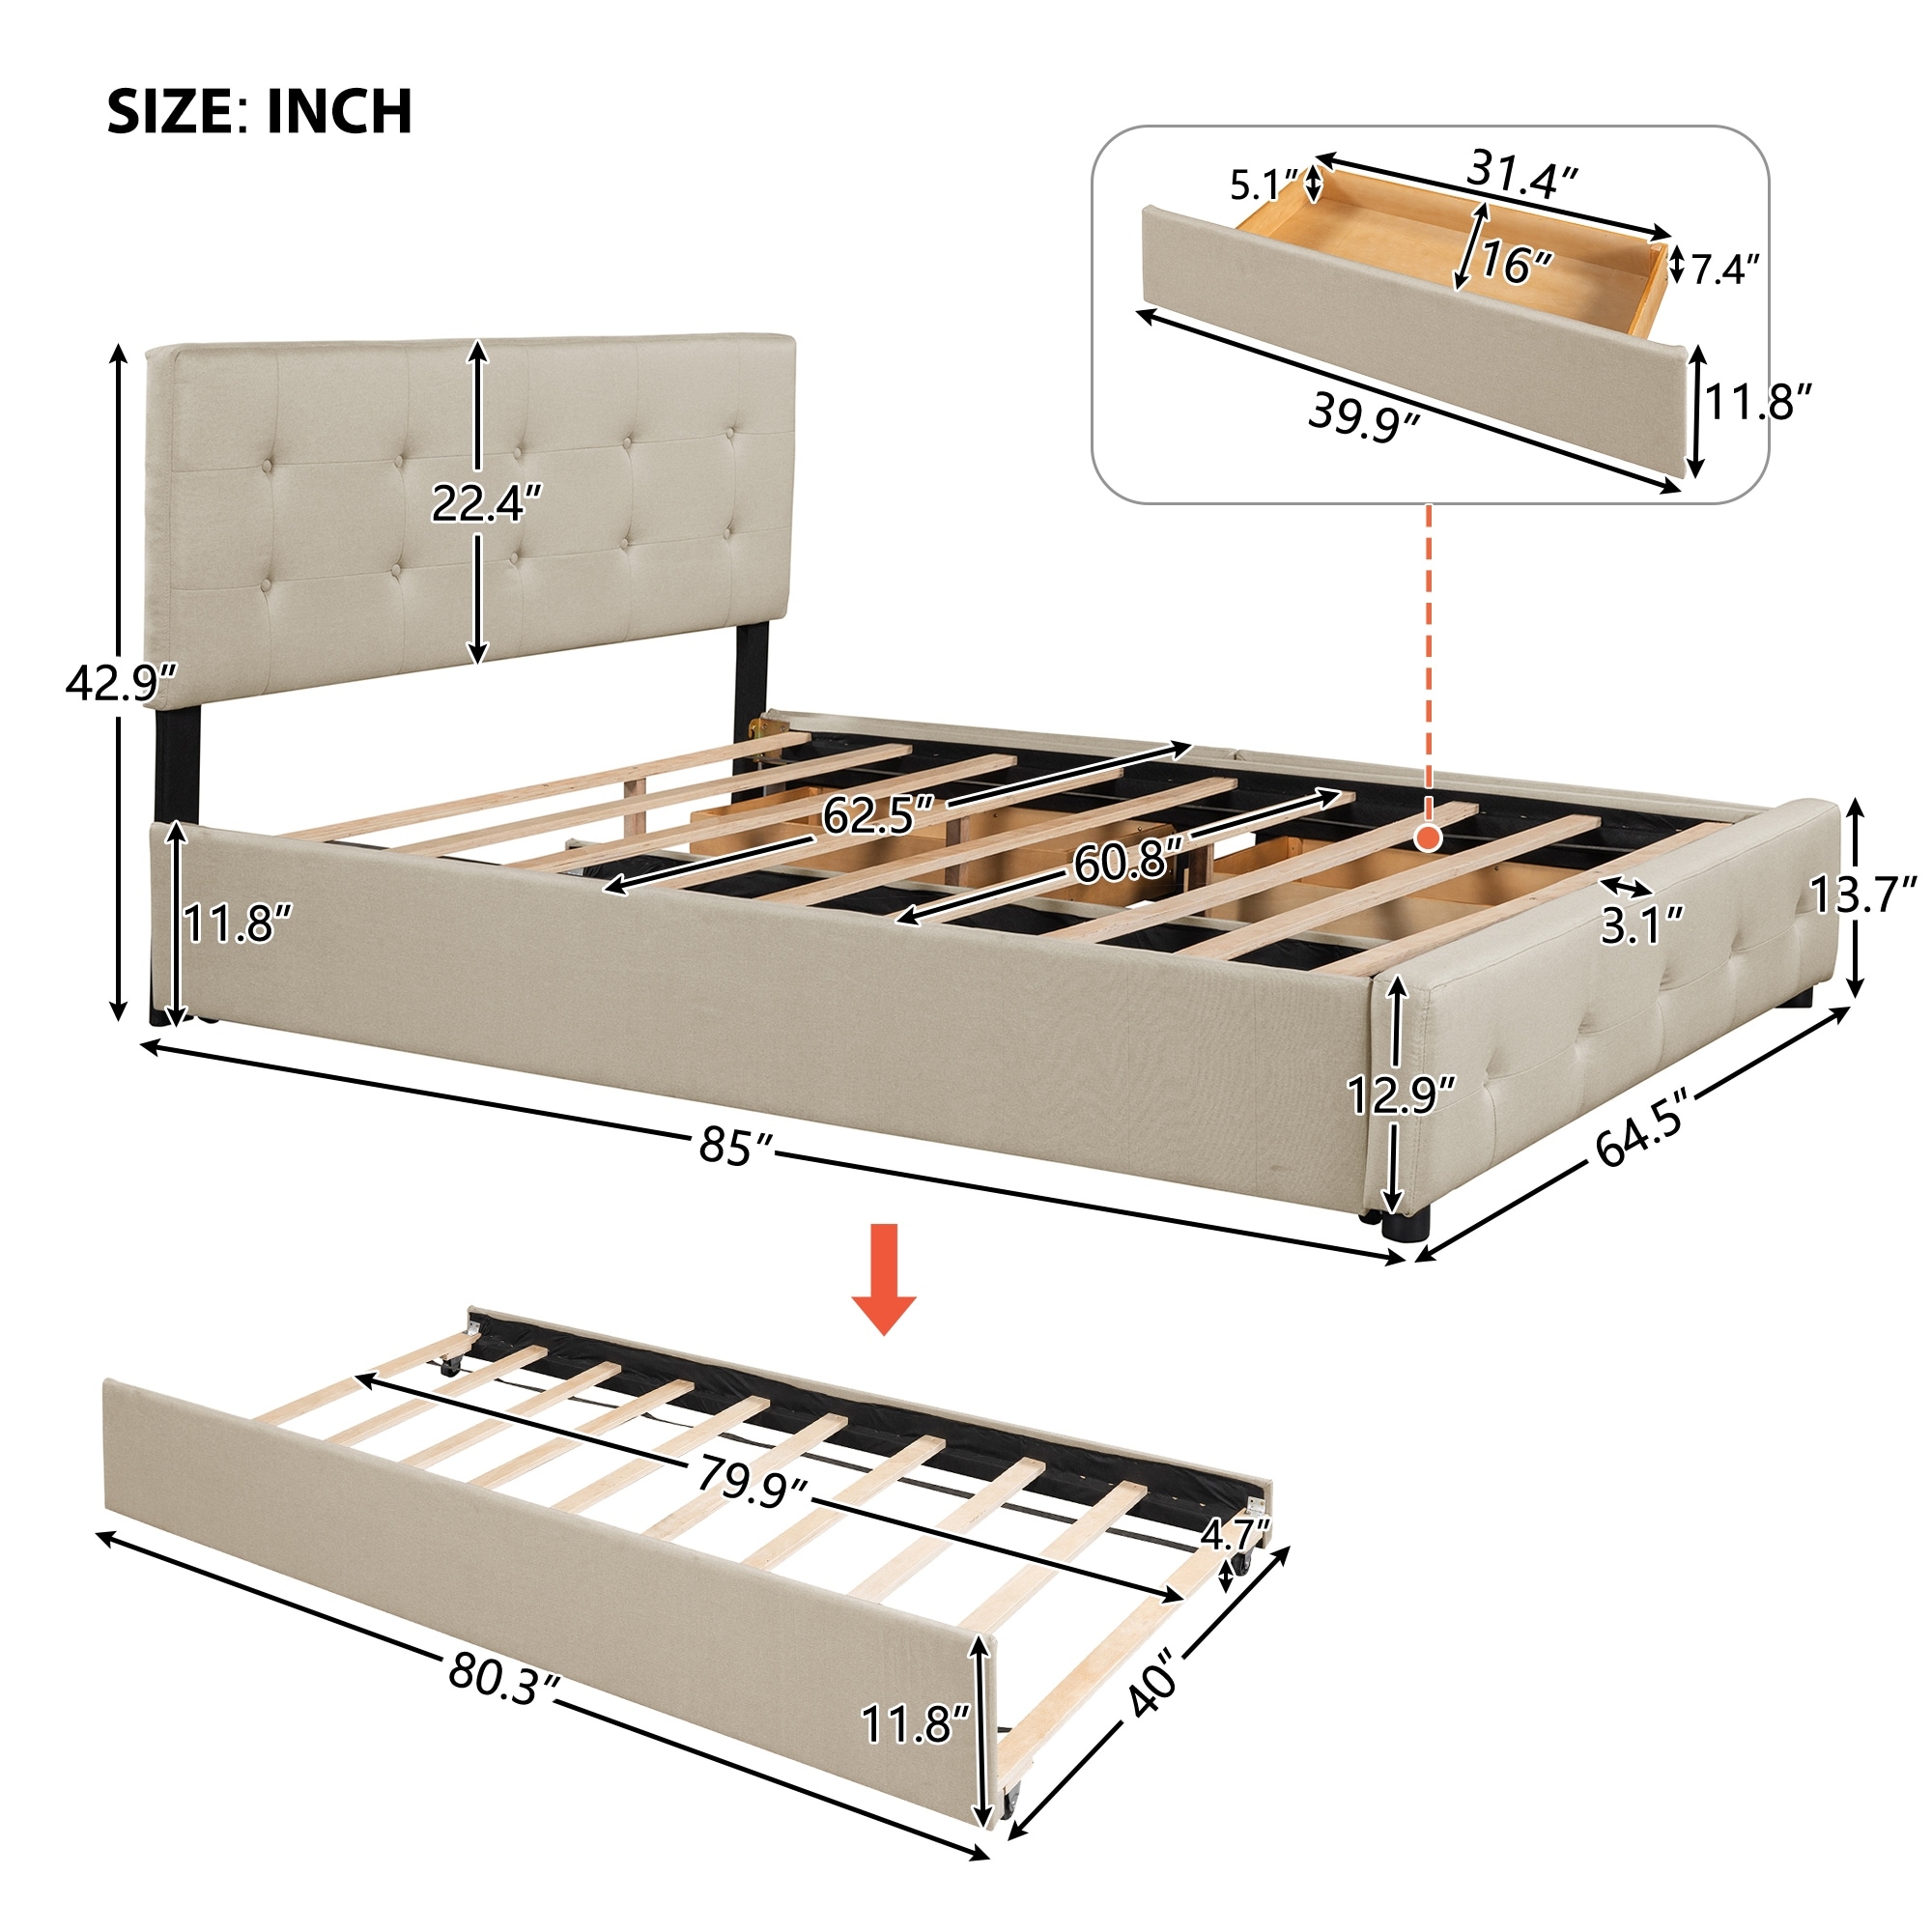 Upholstered Platform Bed with 2 Drawers and 1 Twin XL Trundle, Linen Fabric, Queen Size - Dark Beige